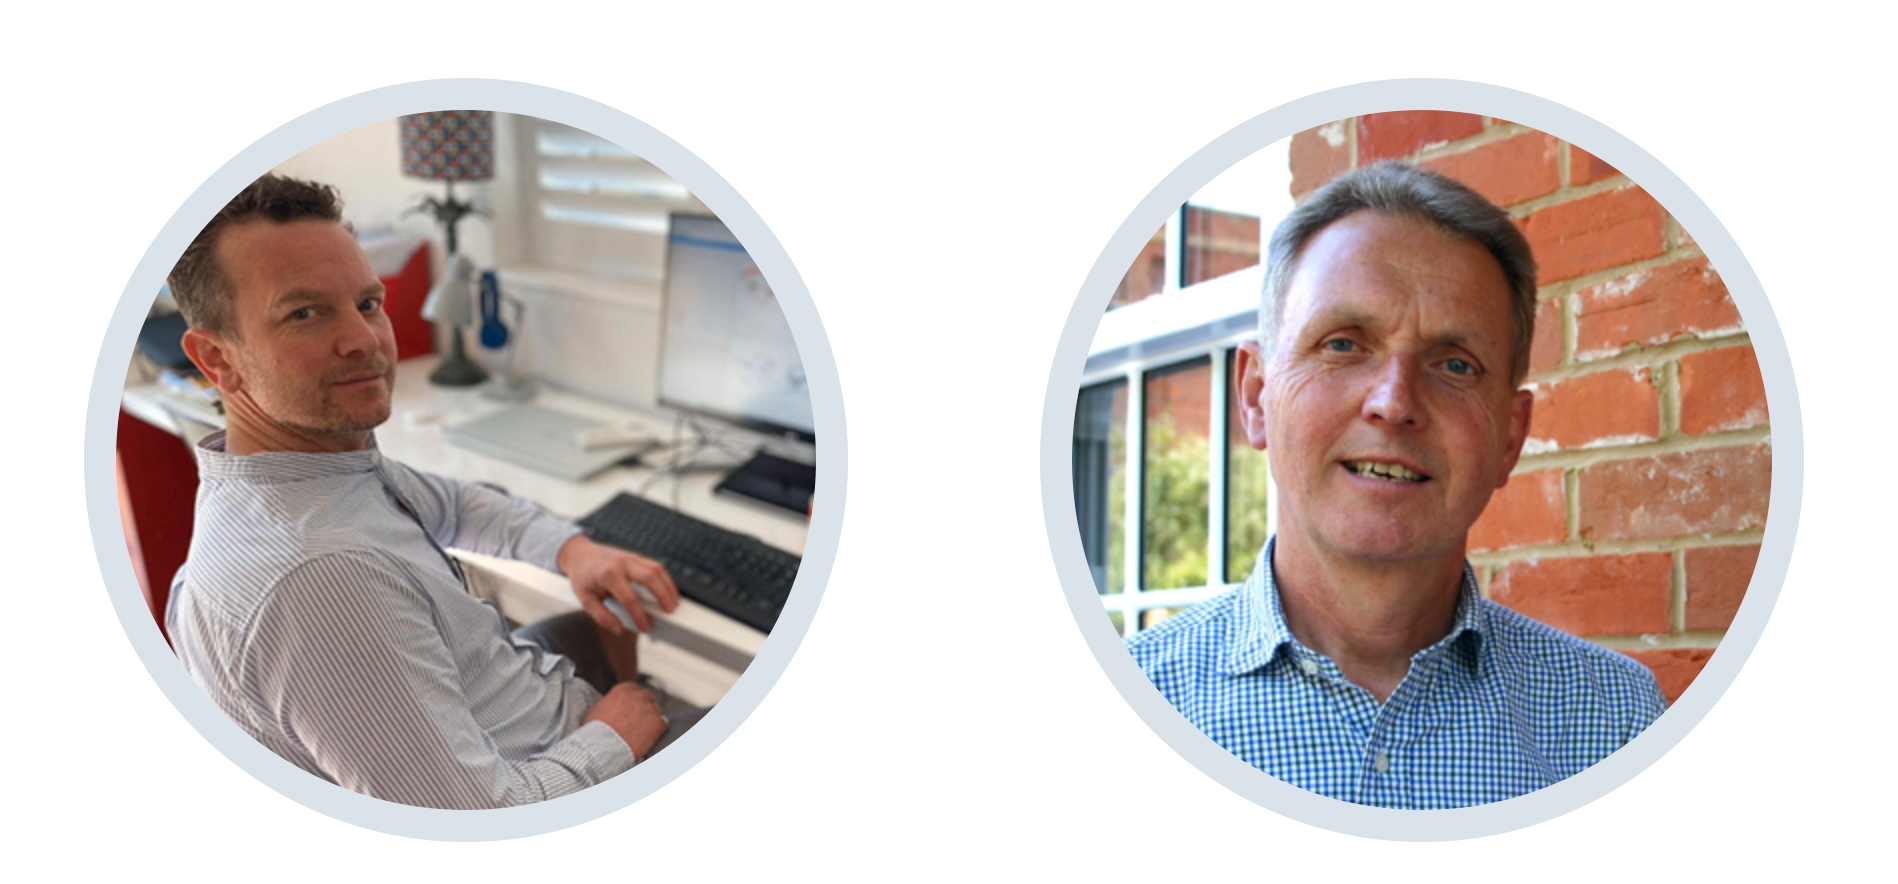 Above: John Aspin (right), now chairman of the company, founded the company when technology was a tiny ‘byte’ of what it is now in the trade. The business is now run day to day by his son Nathan as managing director.